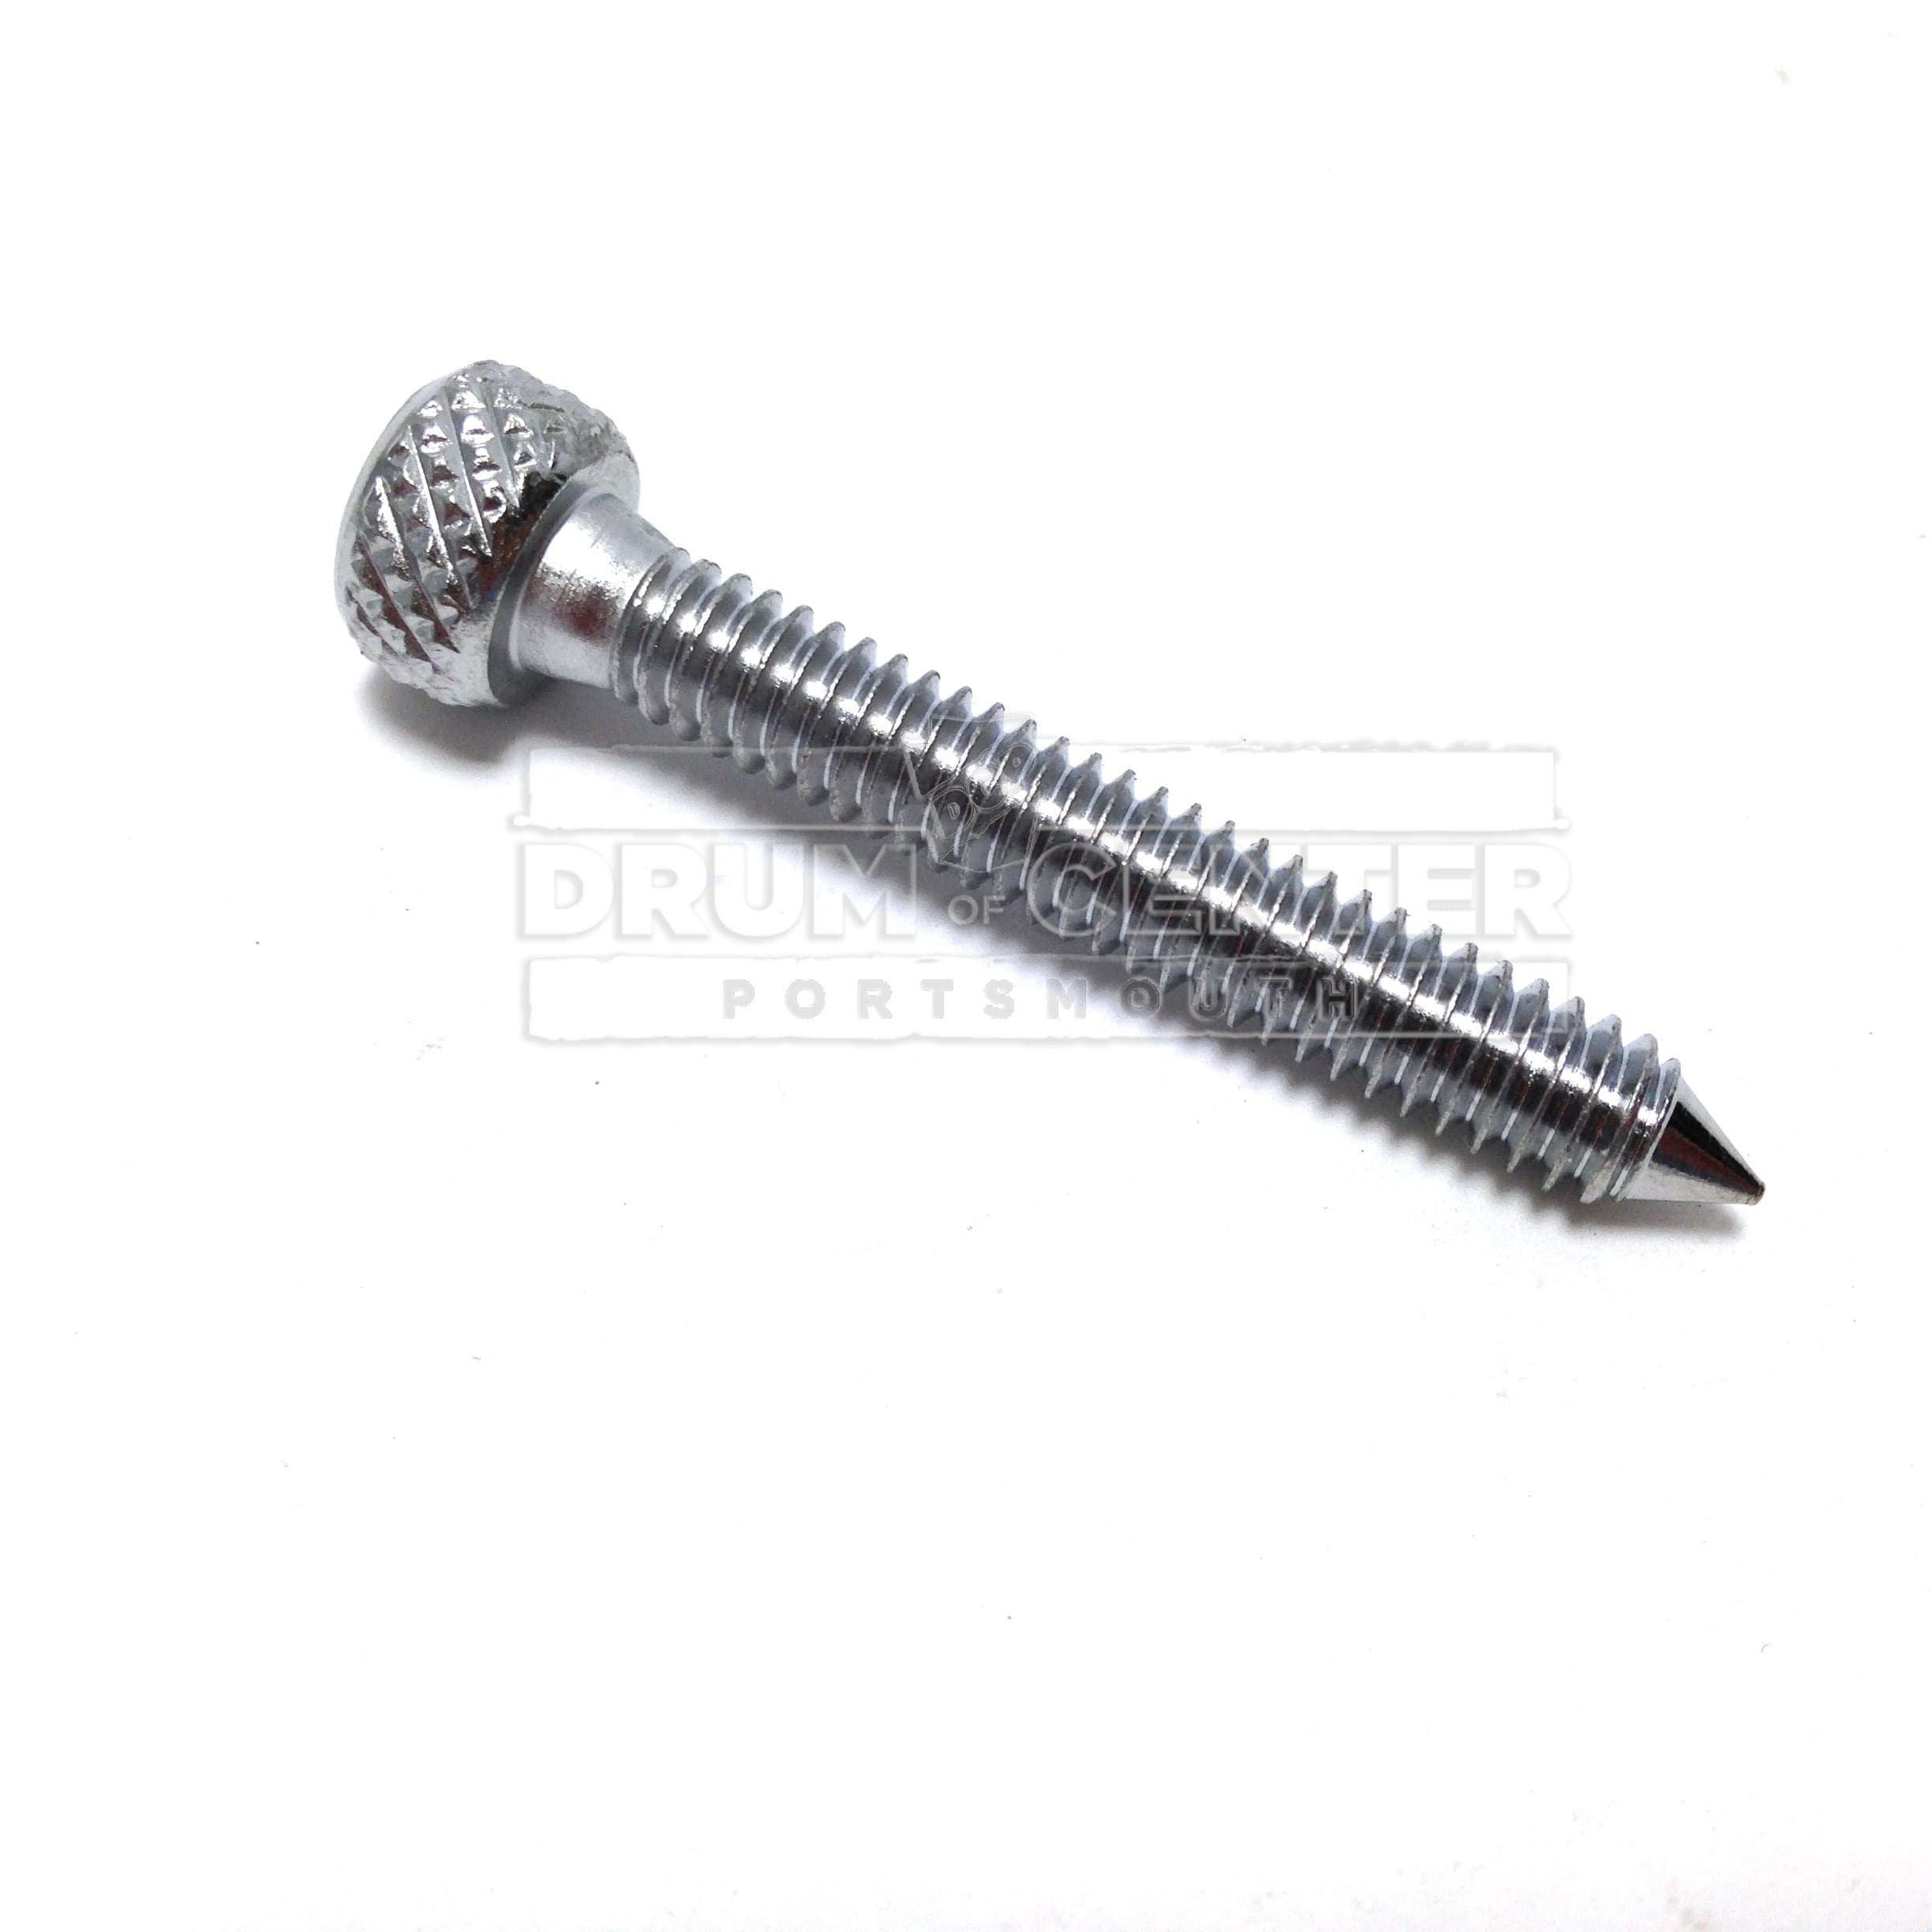 DW Parts : Pedal Spur Screw, Knurled, for 5000/9000 Series – Drum